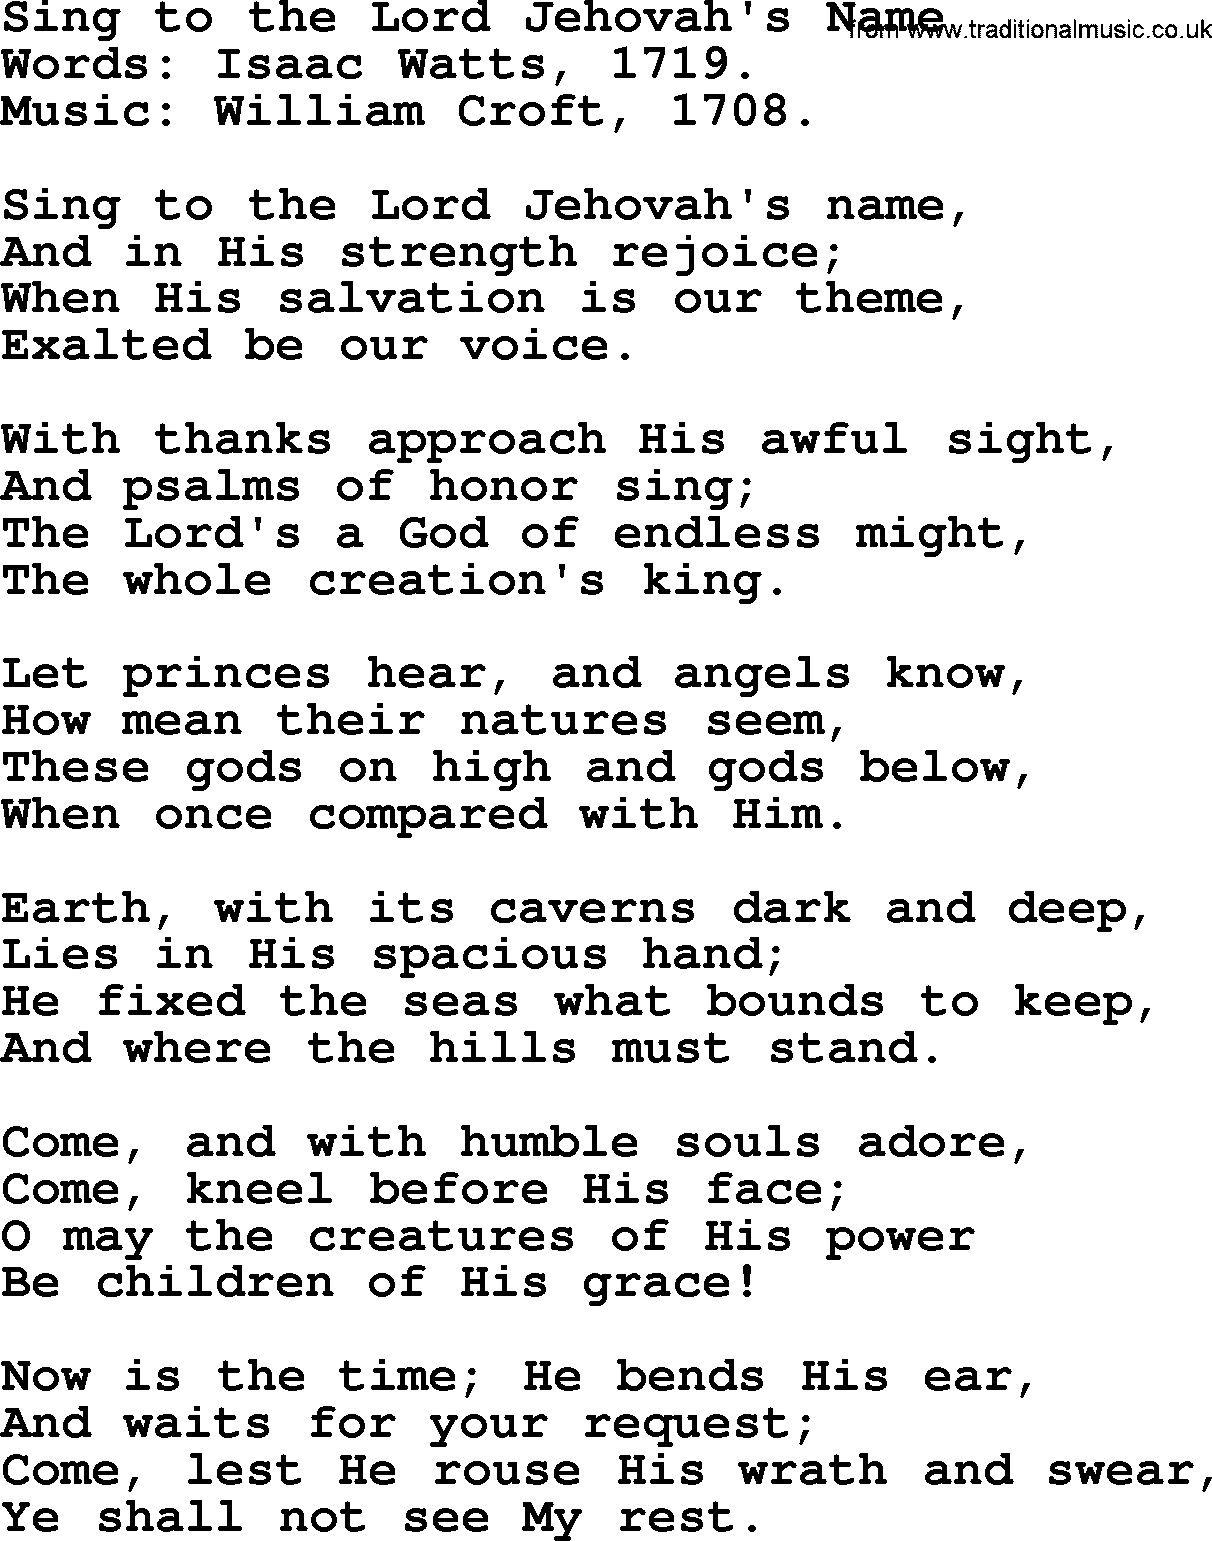 Isaac Watts Christian hymn: Sing to the Lord Jehovah's Name- lyricss